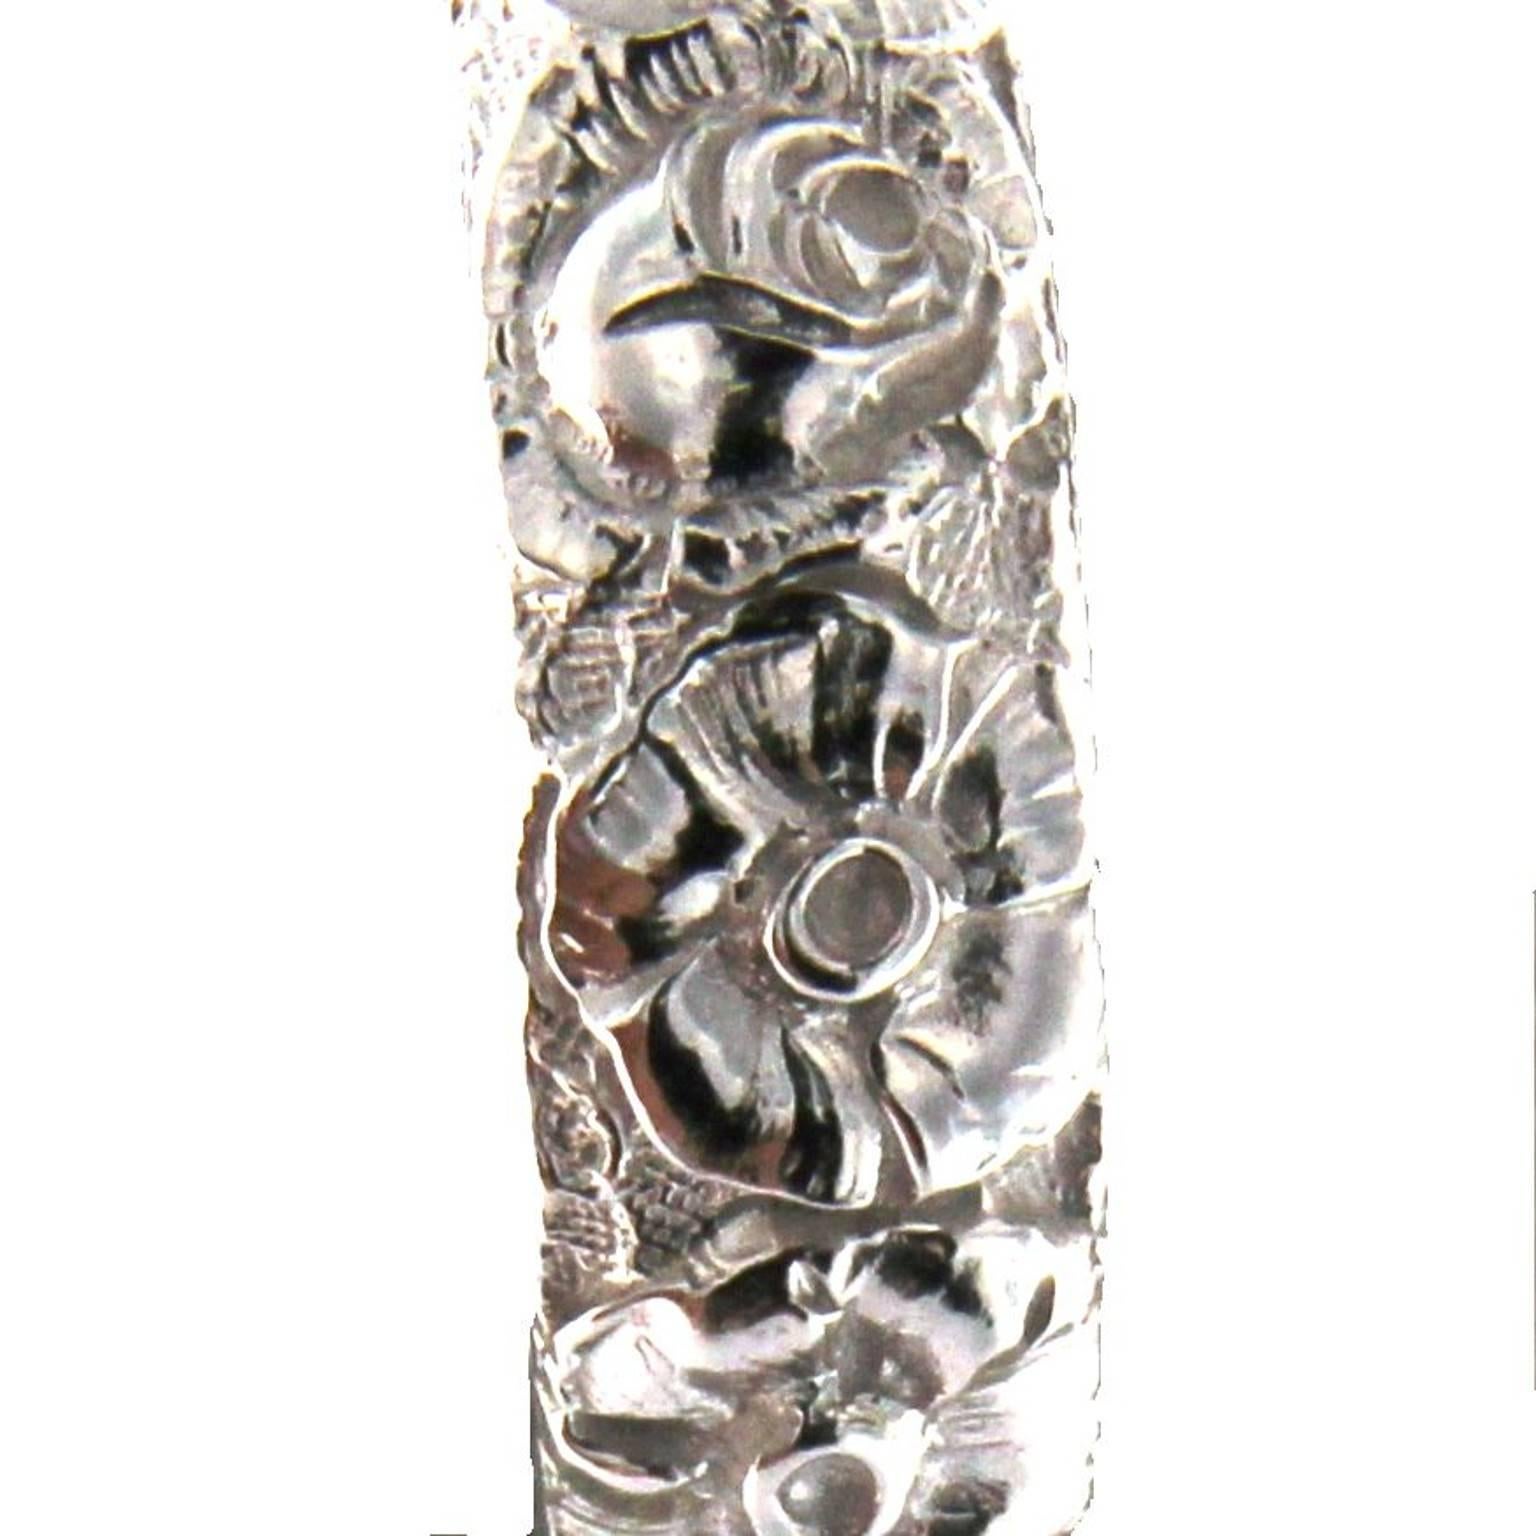 Gorgeous ring embellished by hand chiseling. This ring is part of the Roserosse collection
The chiseling is an almost disappearing ancient art of fully manual workmanship from the origins stolen from the silverware. Today, unfortunately, objects